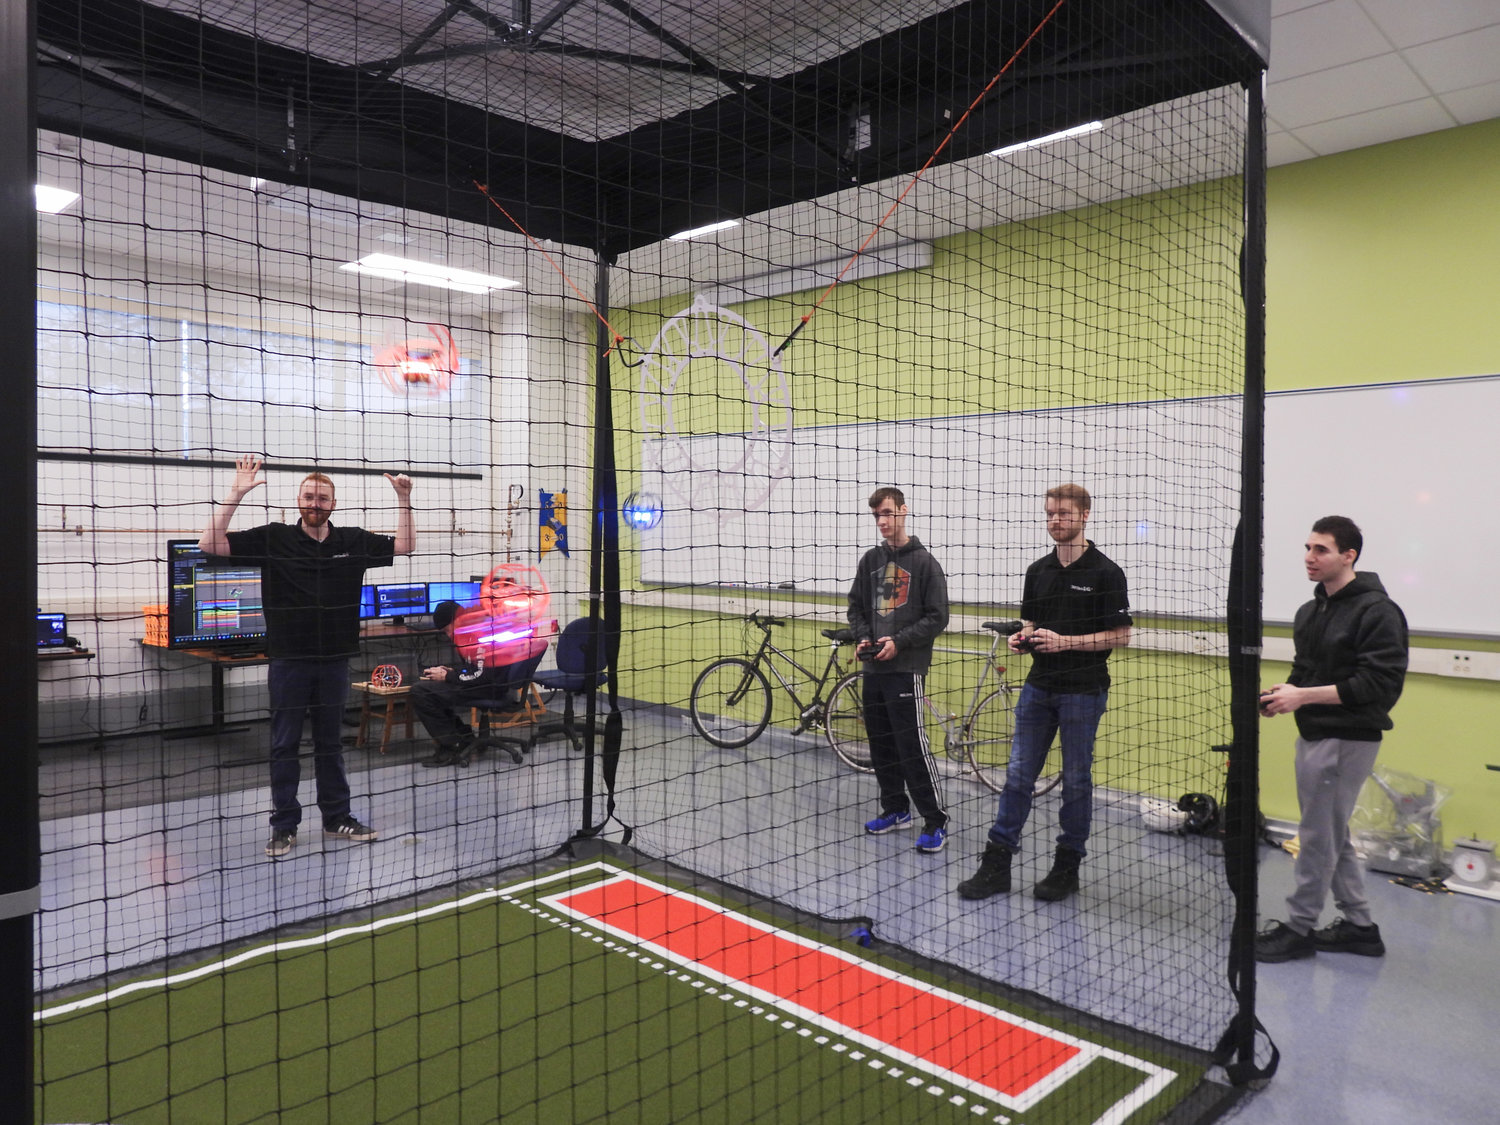 A practice match is held at SUNY Polytechnic with CNY Drones. Pictured Left to Right: John Reade, CNY Drones planning committee member and director of IT at Quanterion Solutions, Cameron Rogers-Duell, student at SUNY Poly and president of the AMA Drone Student Club, Ryan Payne, CNY Drones member and equipment engineer at Wolfspeed, Matthew Sayar, student at SUNY Poly and treasurer of the AMA Drone Student Club